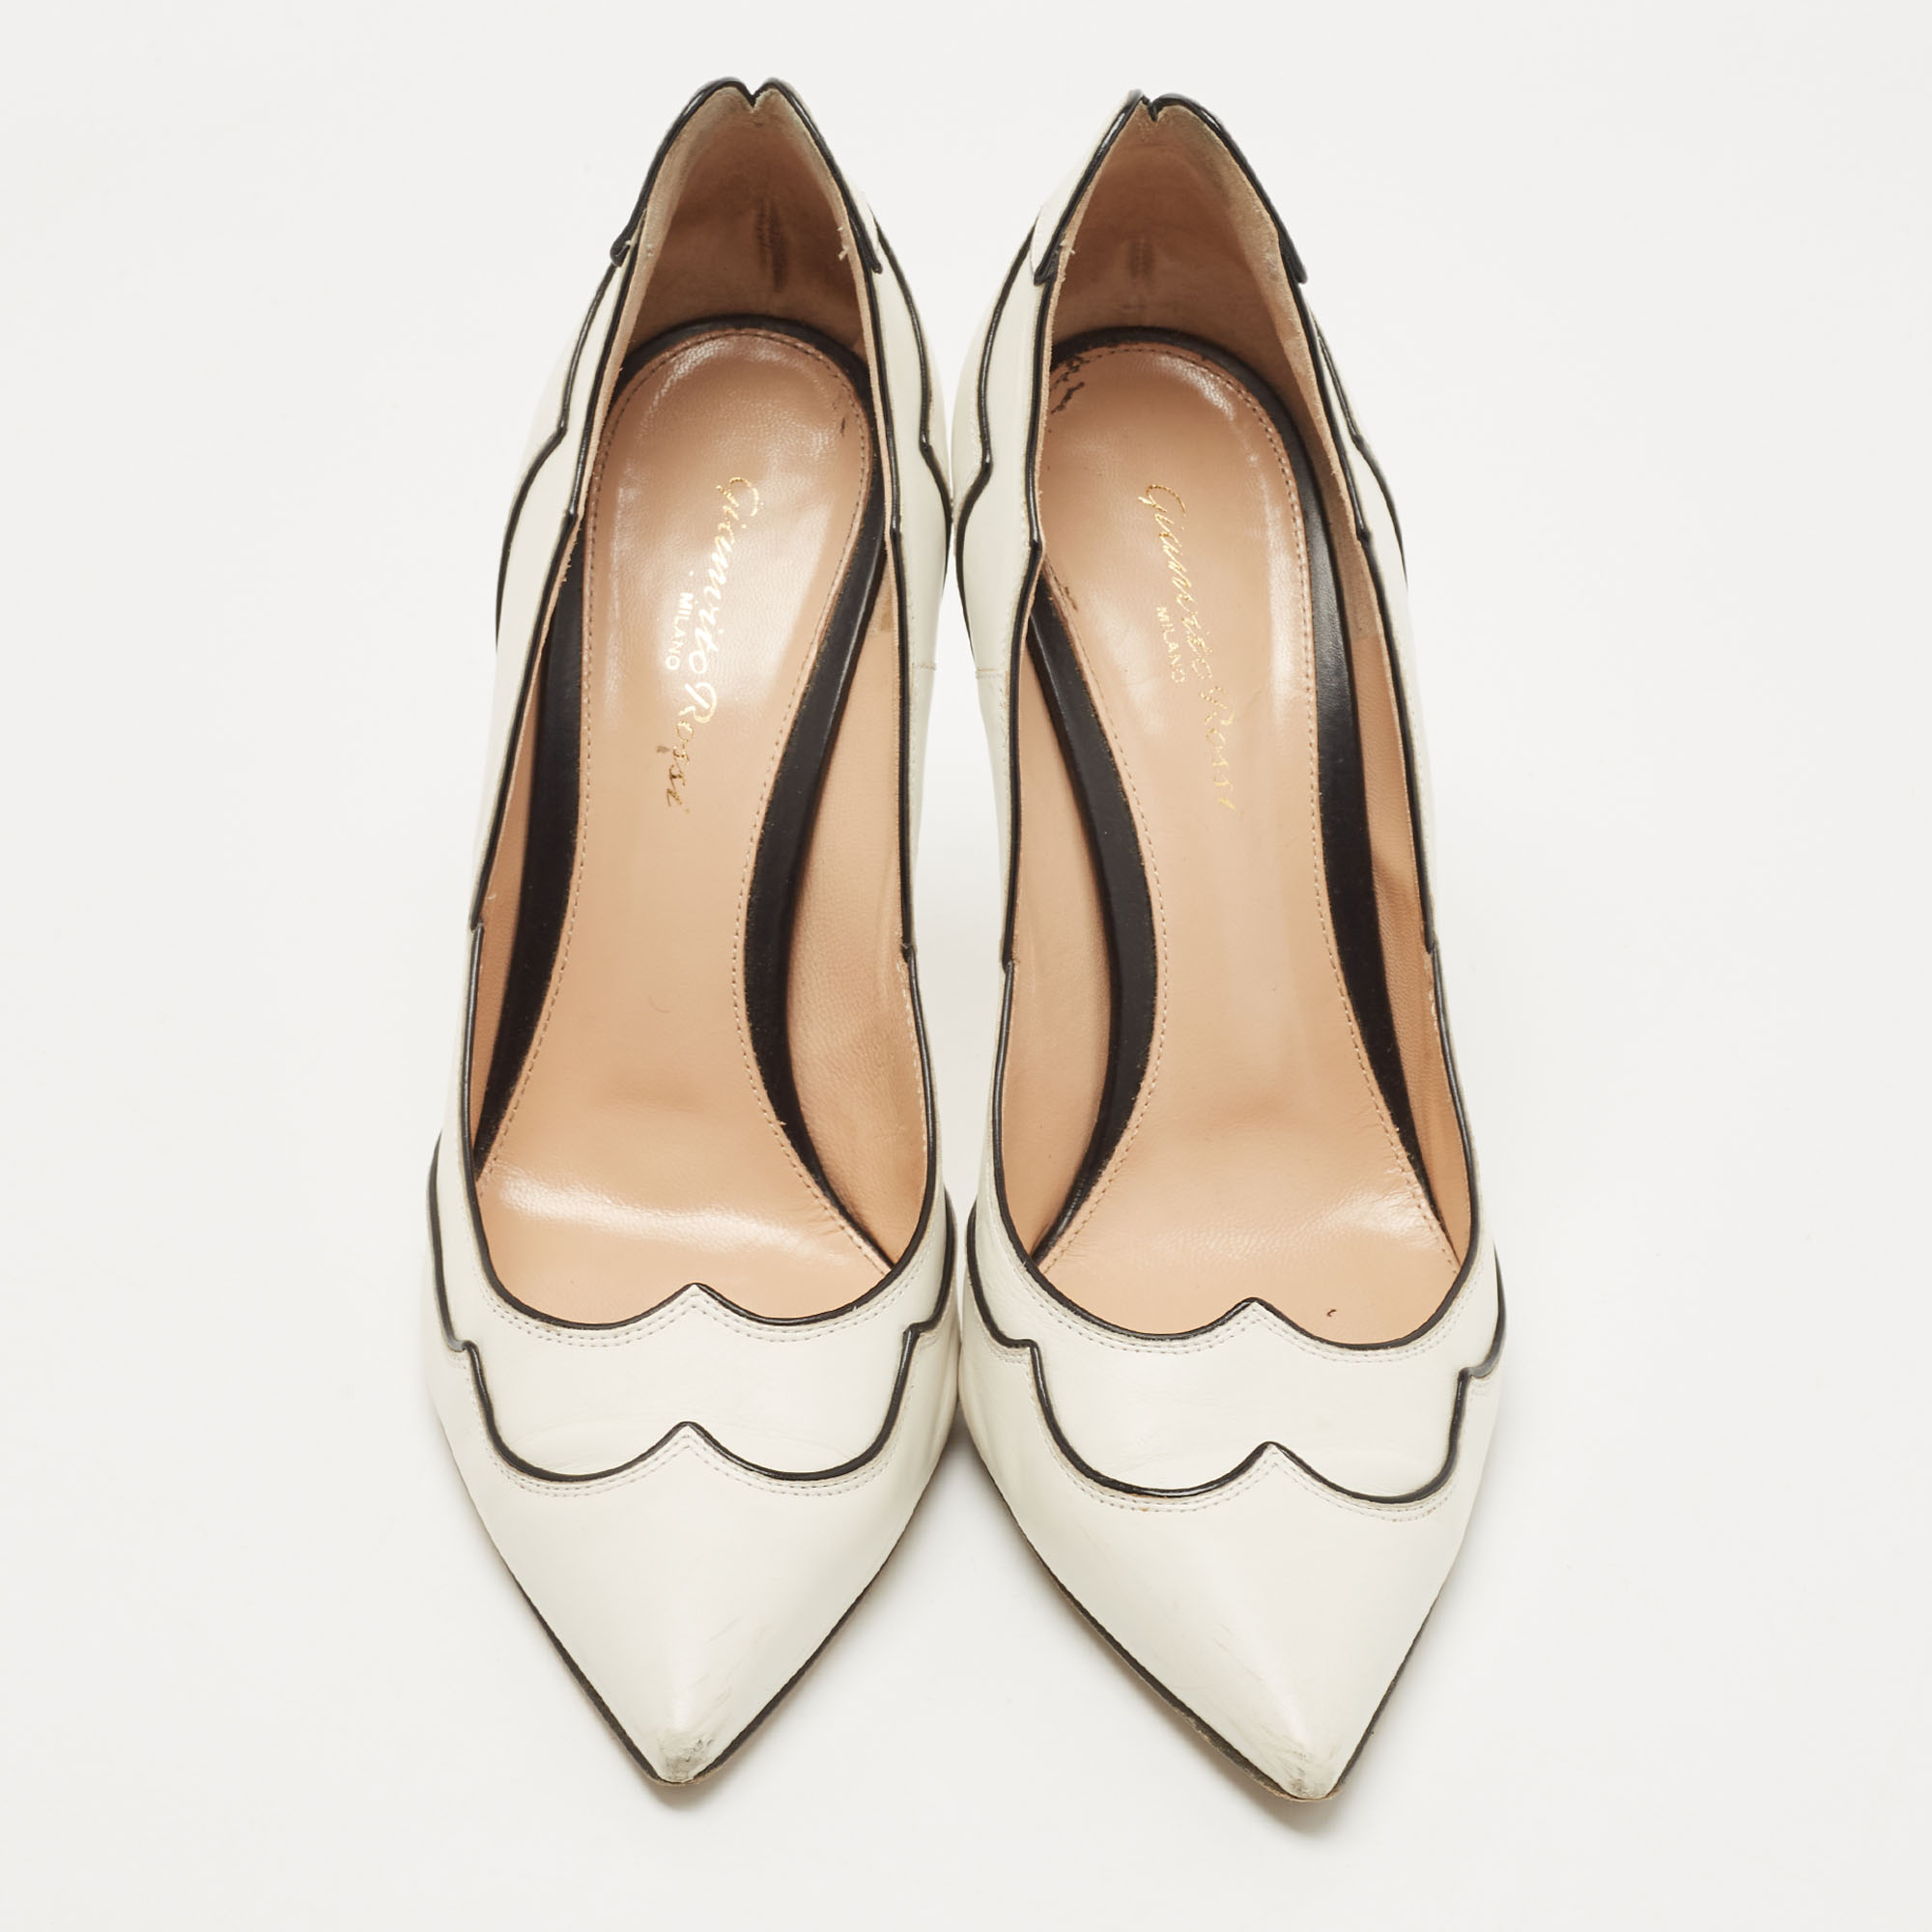 Gianvito Rossi White/Black Scalloped Leather Pointed Toe Pumps Size 40